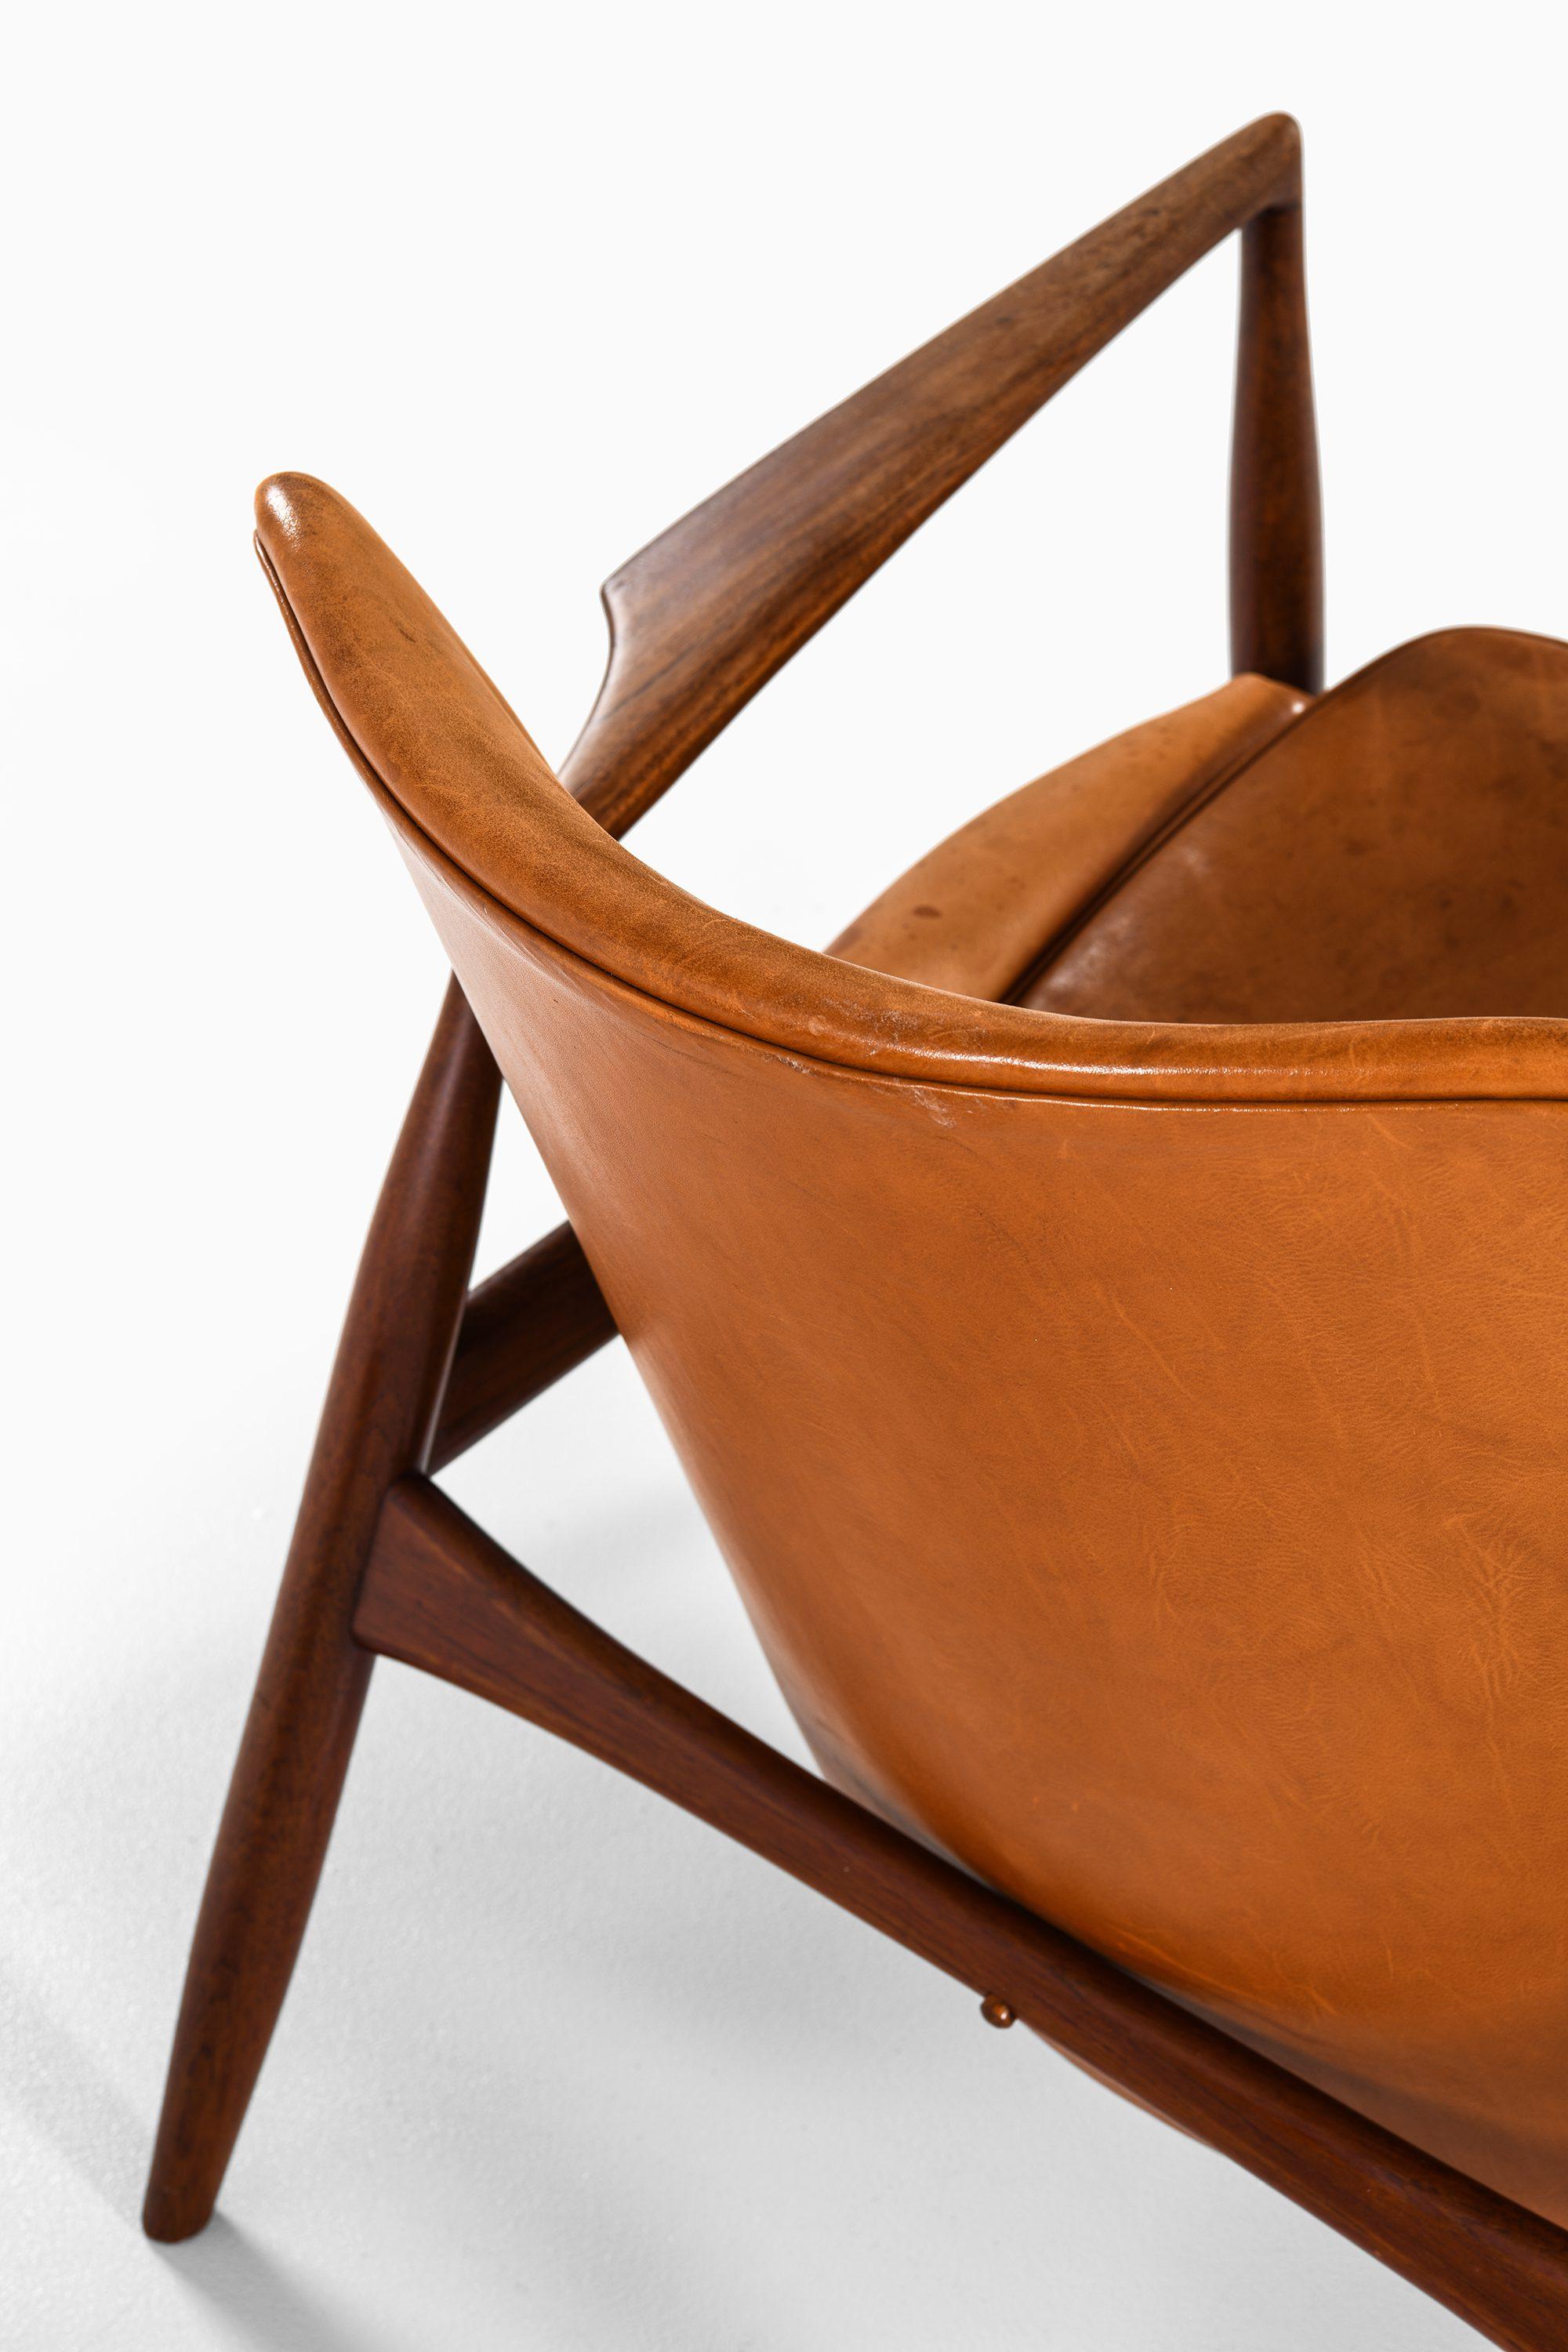 Pair of Easy Chairs in Teak and Leather by Ib Kofod-Larsen, 1950s For Sale 4